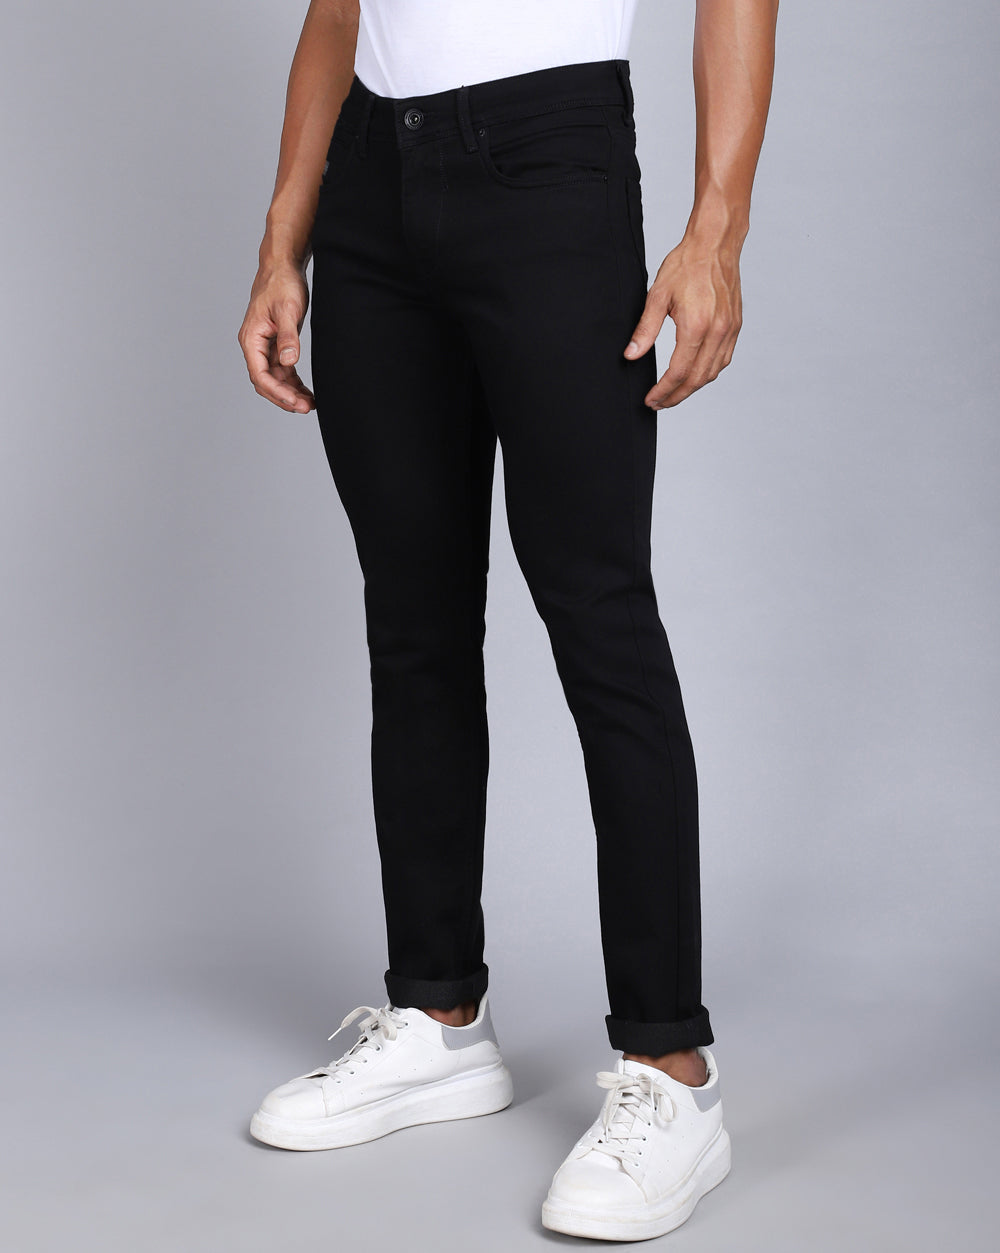 Slim zed black tone jeans, Button, Ultra Low Rise at Rs 600/piece in  Bengaluru